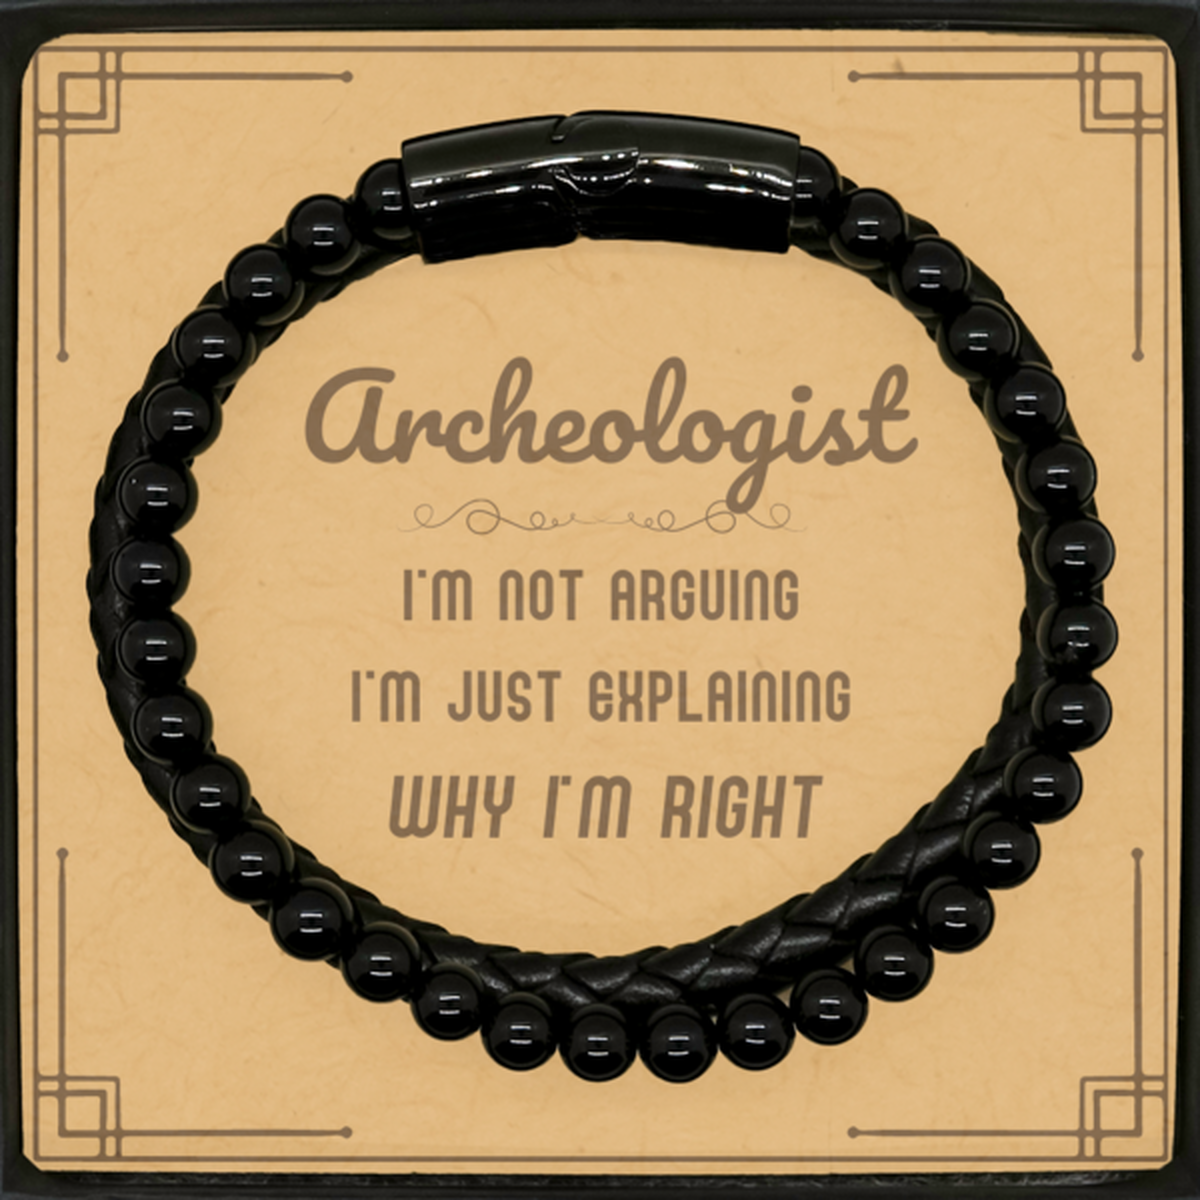 Archeologist I'm not Arguing. I'm Just Explaining Why I'm RIGHT Stone Leather Bracelets, Funny Saying Quote Archeologist Gifts For Archeologist Message Card Graduation Birthday Christmas Gifts for Men Women Coworker